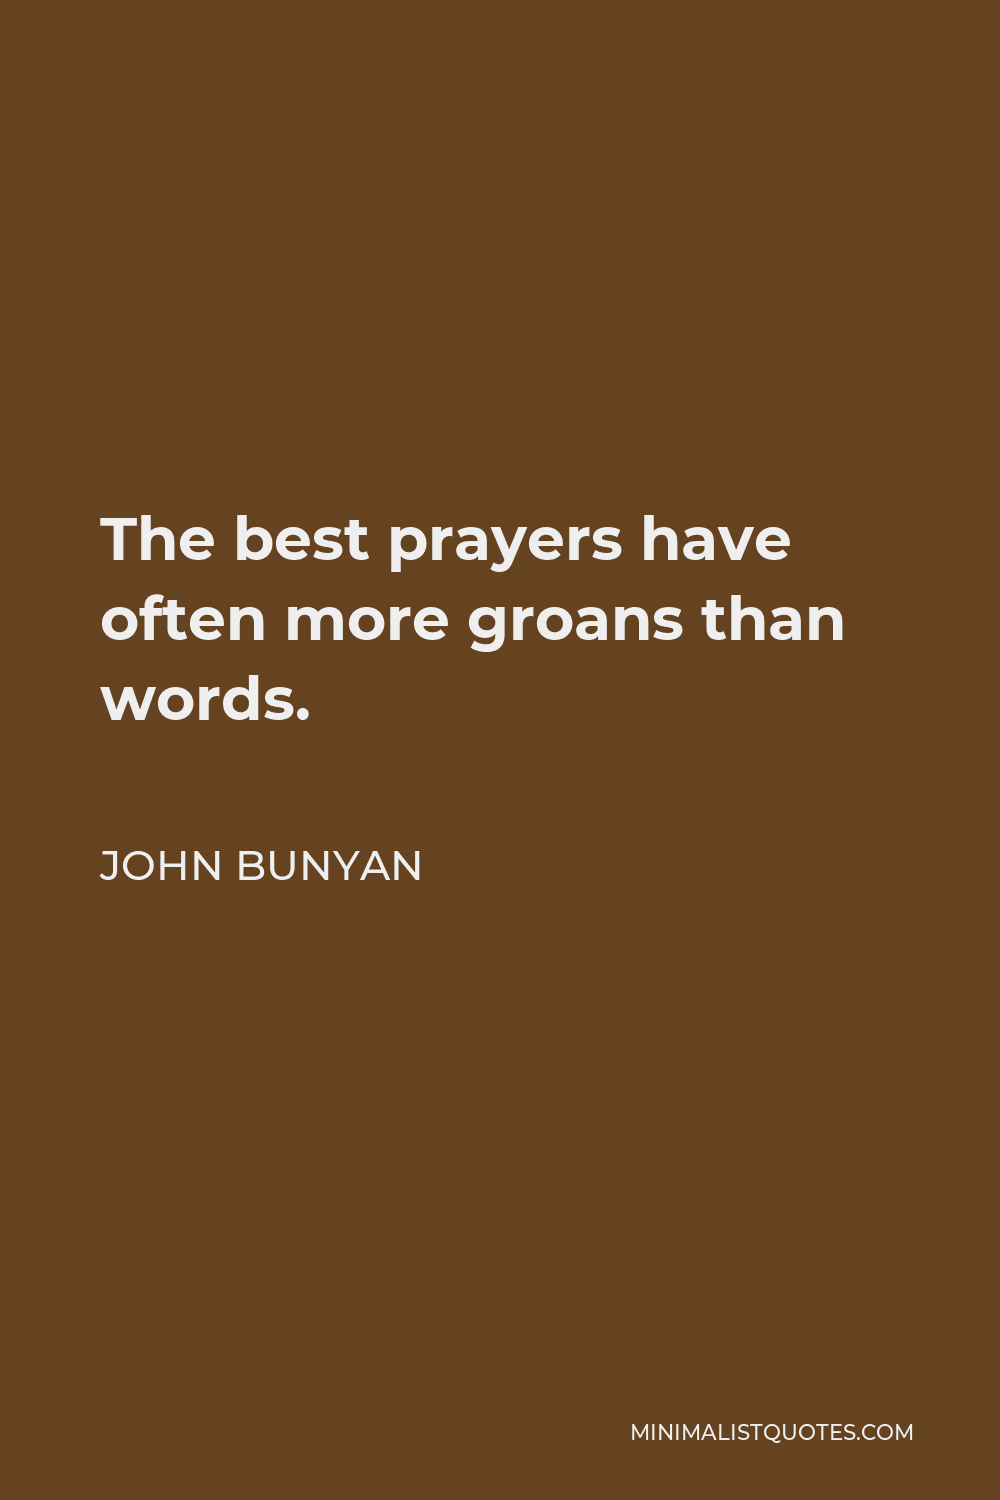 John Bunyan Quote - The best prayers have often more groans than words.